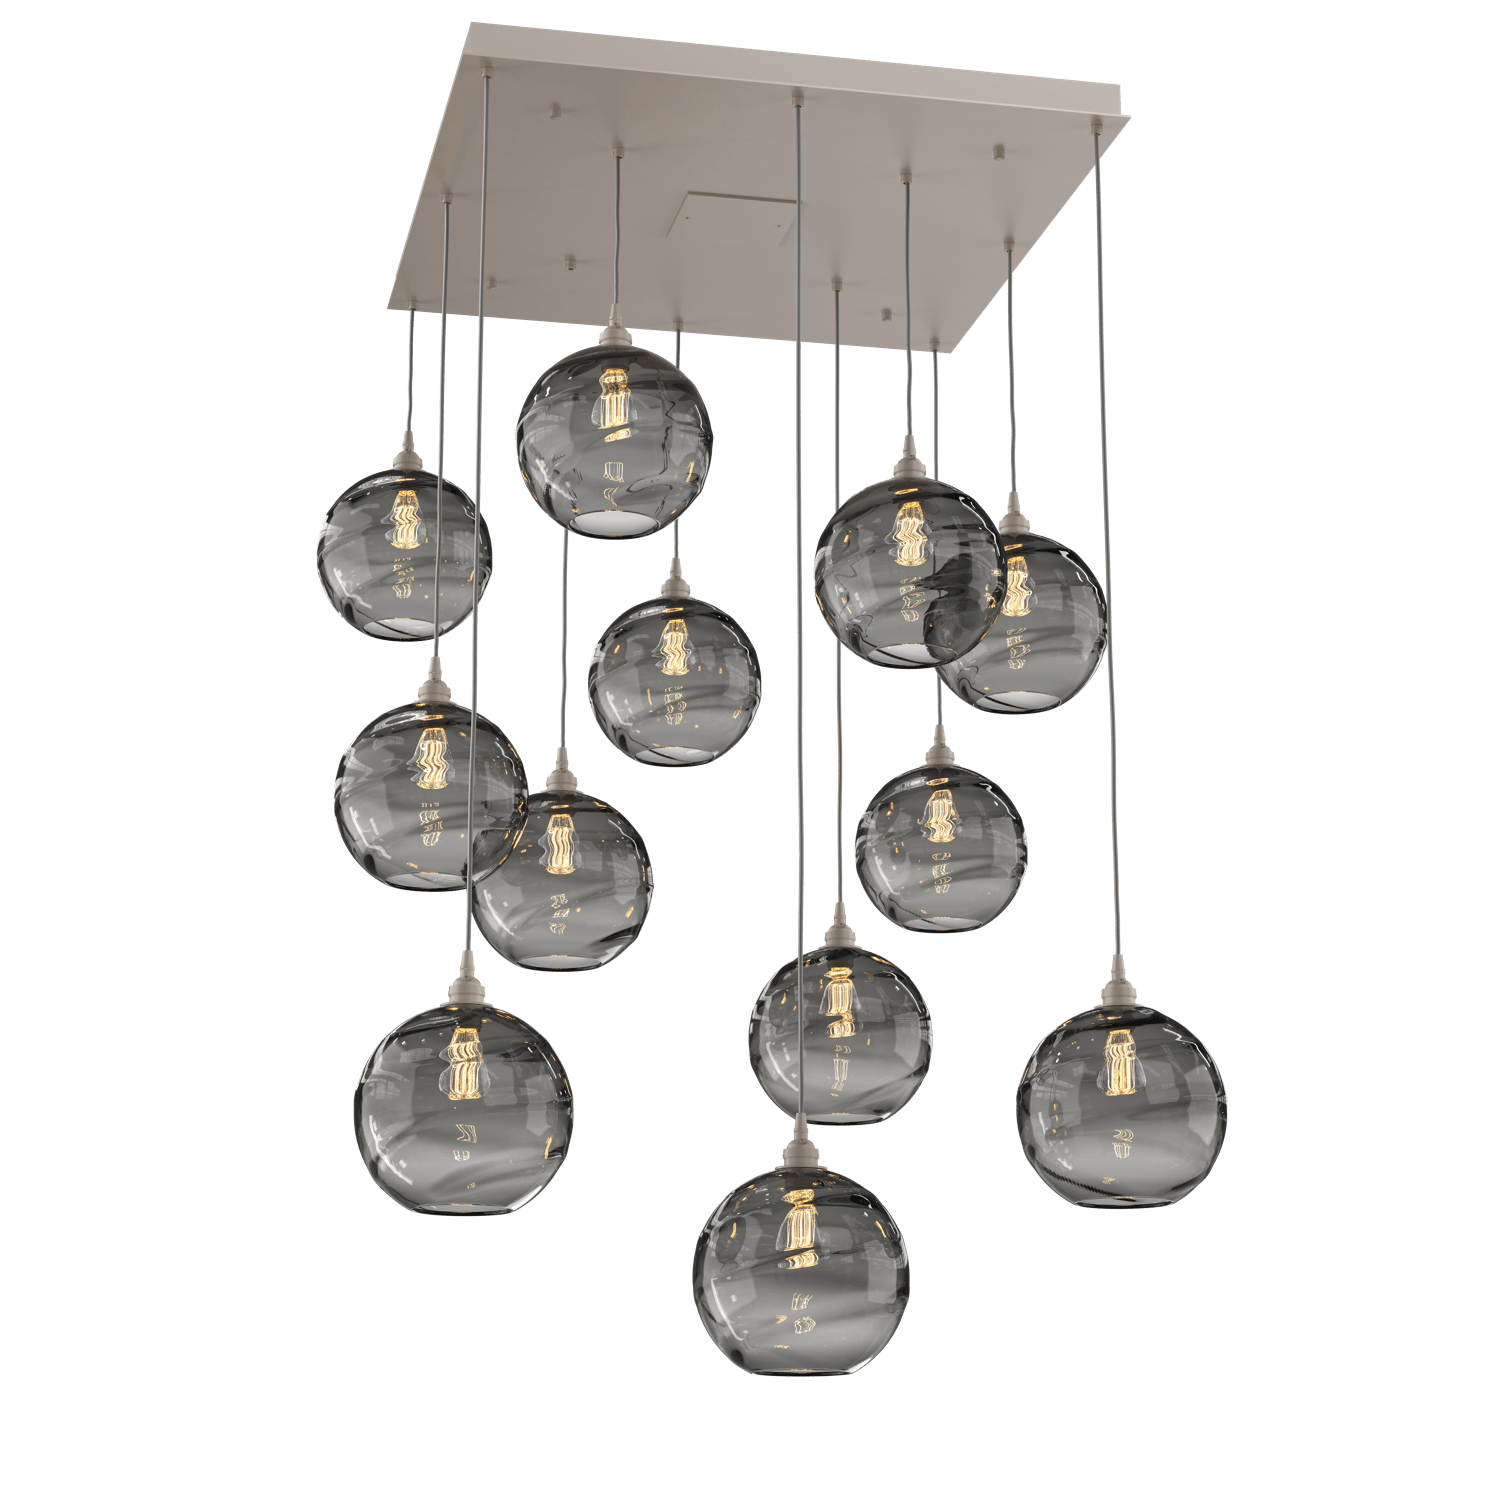 CHB0047-12-BS-OS-Hammerton-Studio-Optic-Blown-Glass-Terra-12-light-square-pendant-chandelier-with-metallic-beige-silver-finish-and-optic-smoke-blown-glass-shades-and-incandescent-lamping